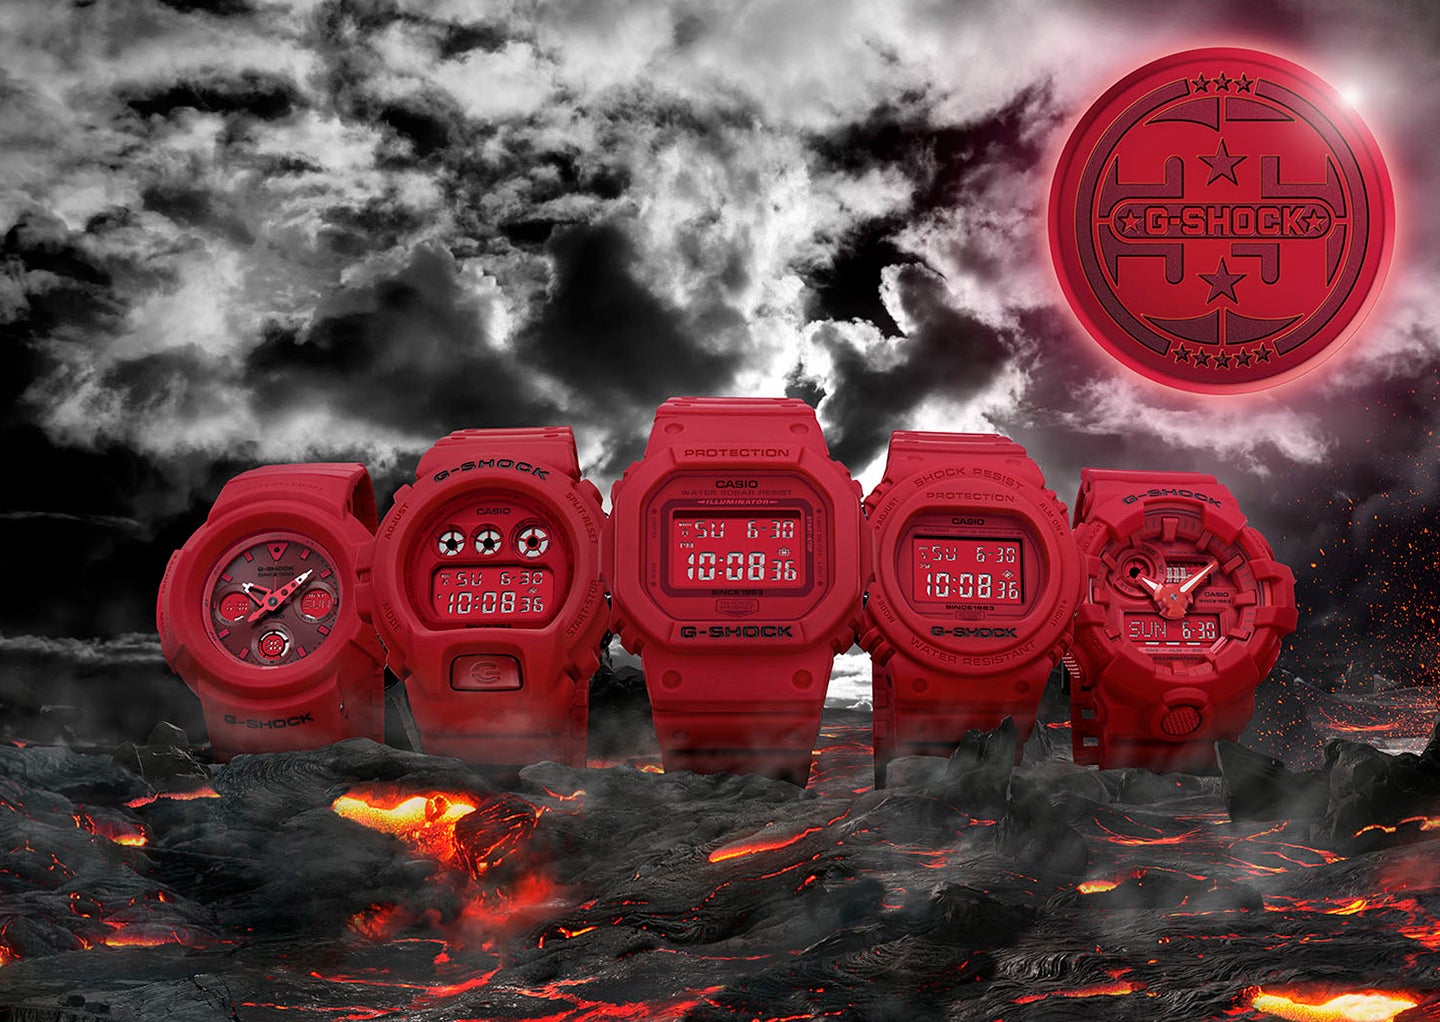 G SHOCK周年、記念モデル第3弾は赤でまとめたRED OUT   マイ